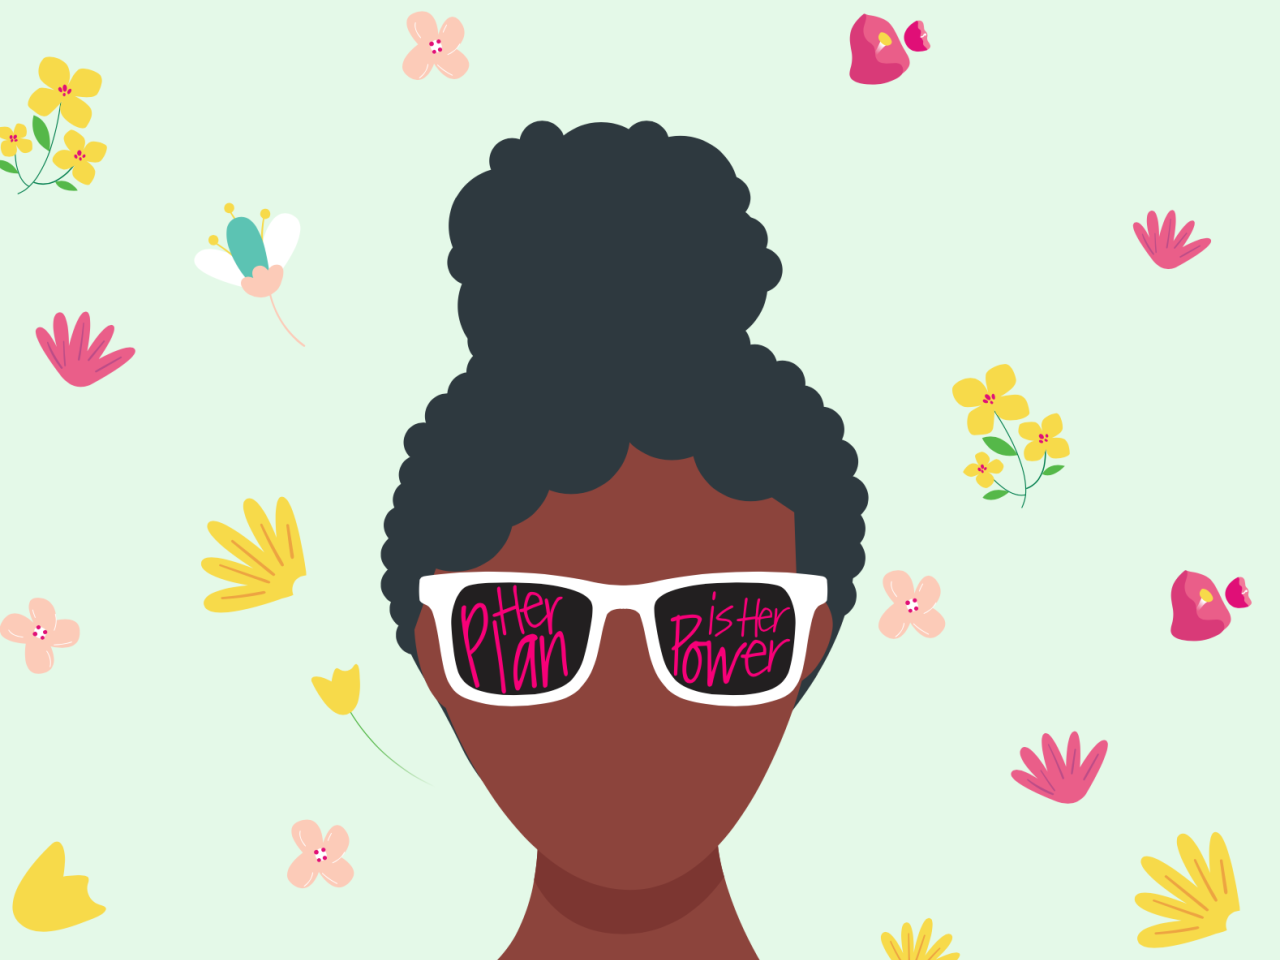 Illustration of a woman wearing glasses with the text "Her Plan Is Her Power" in the lenses of the glasses